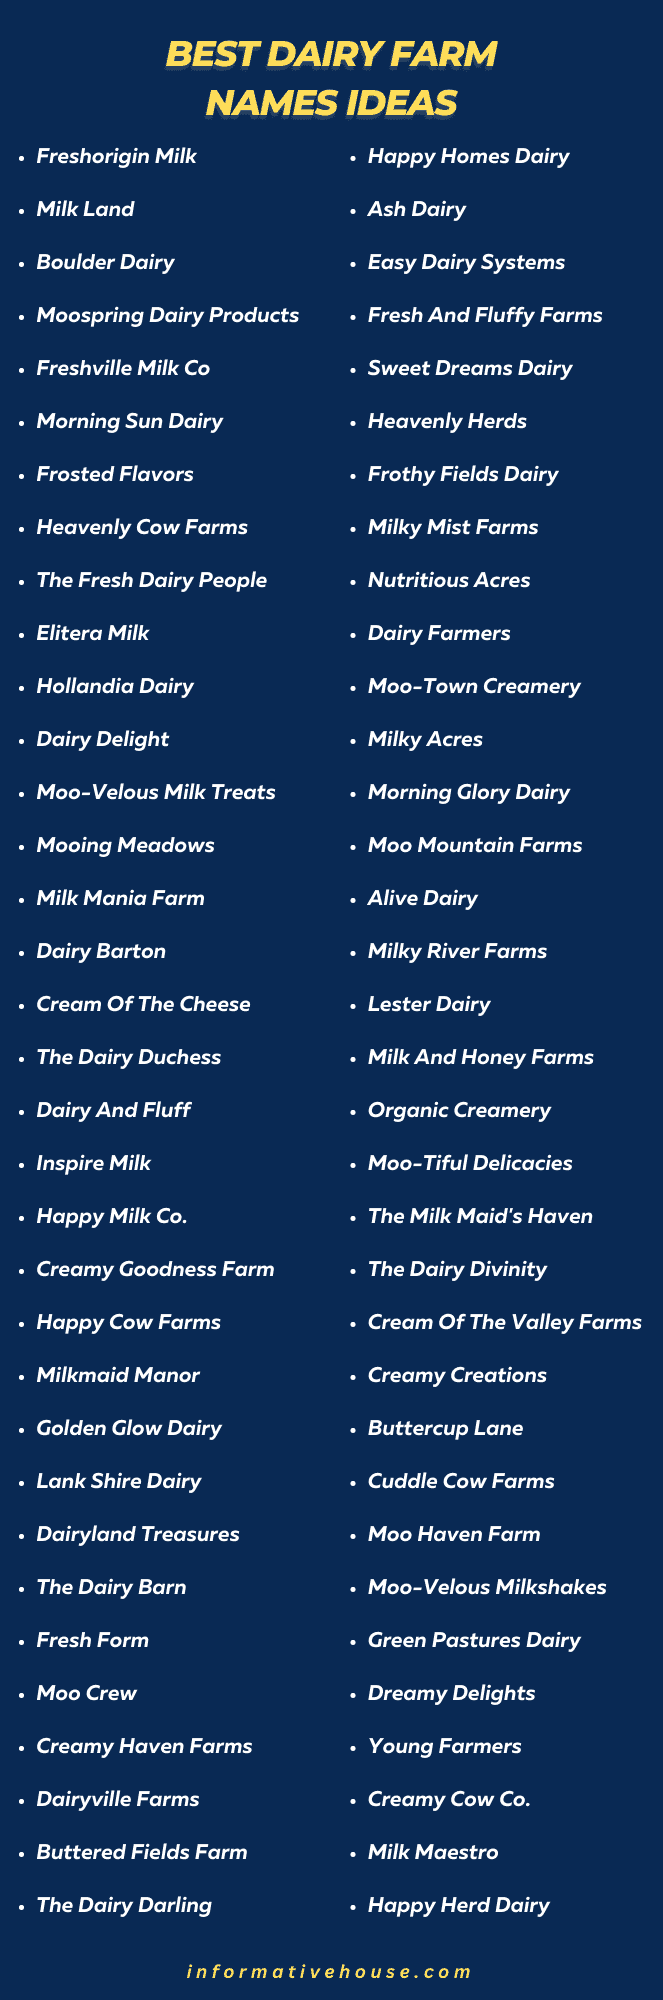 499+ Best Dairy Farm Names Ideas List and Suggestions - Informative House